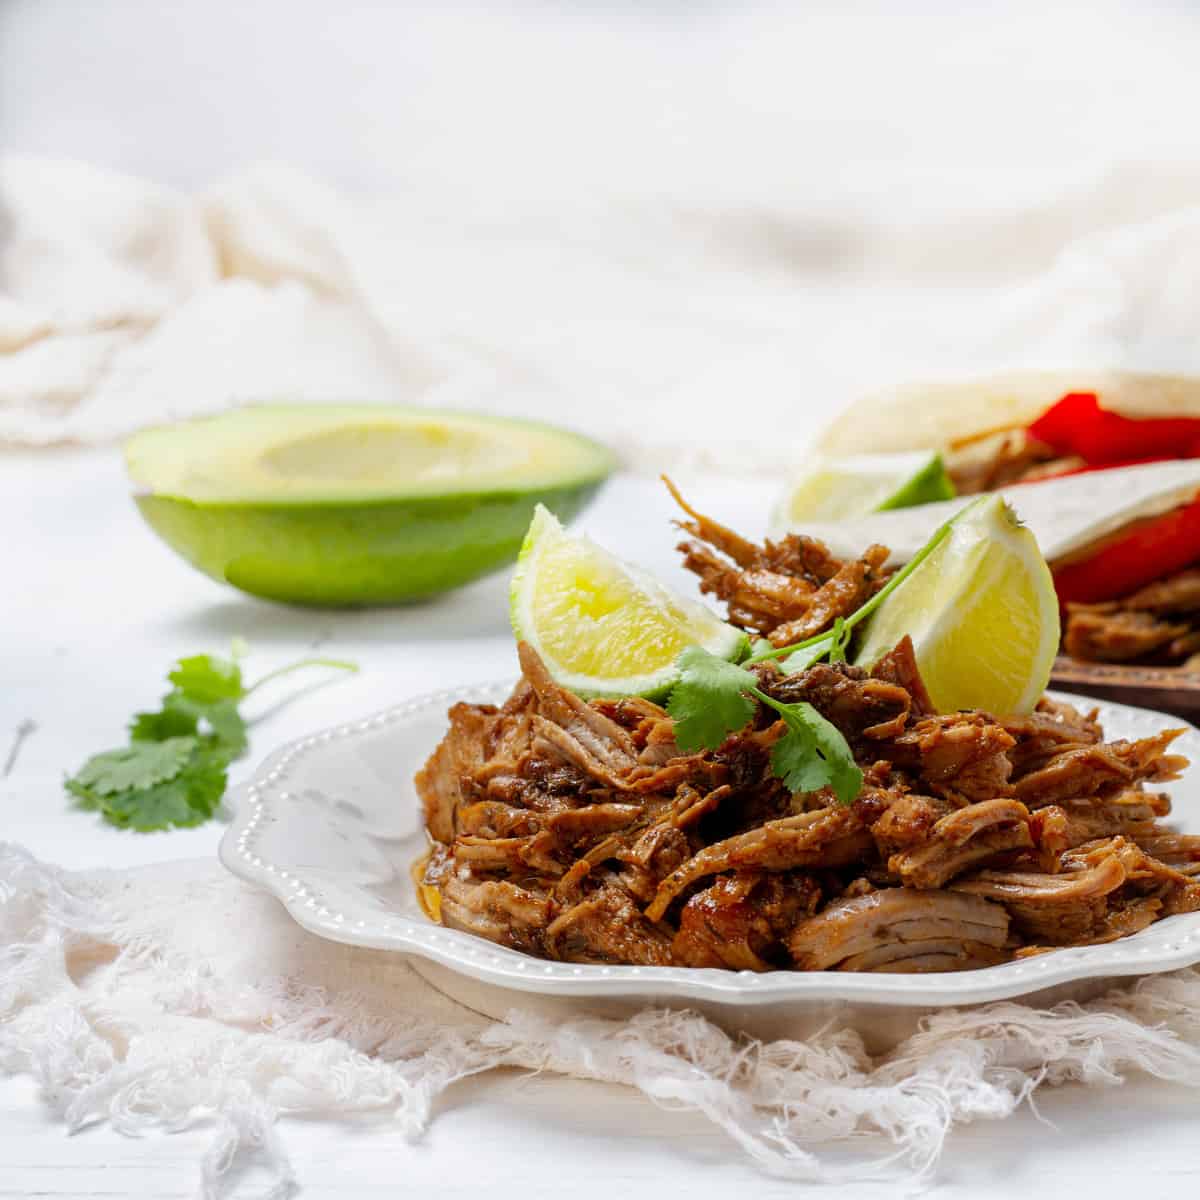 Carnitas platted with lemon slice and avocados